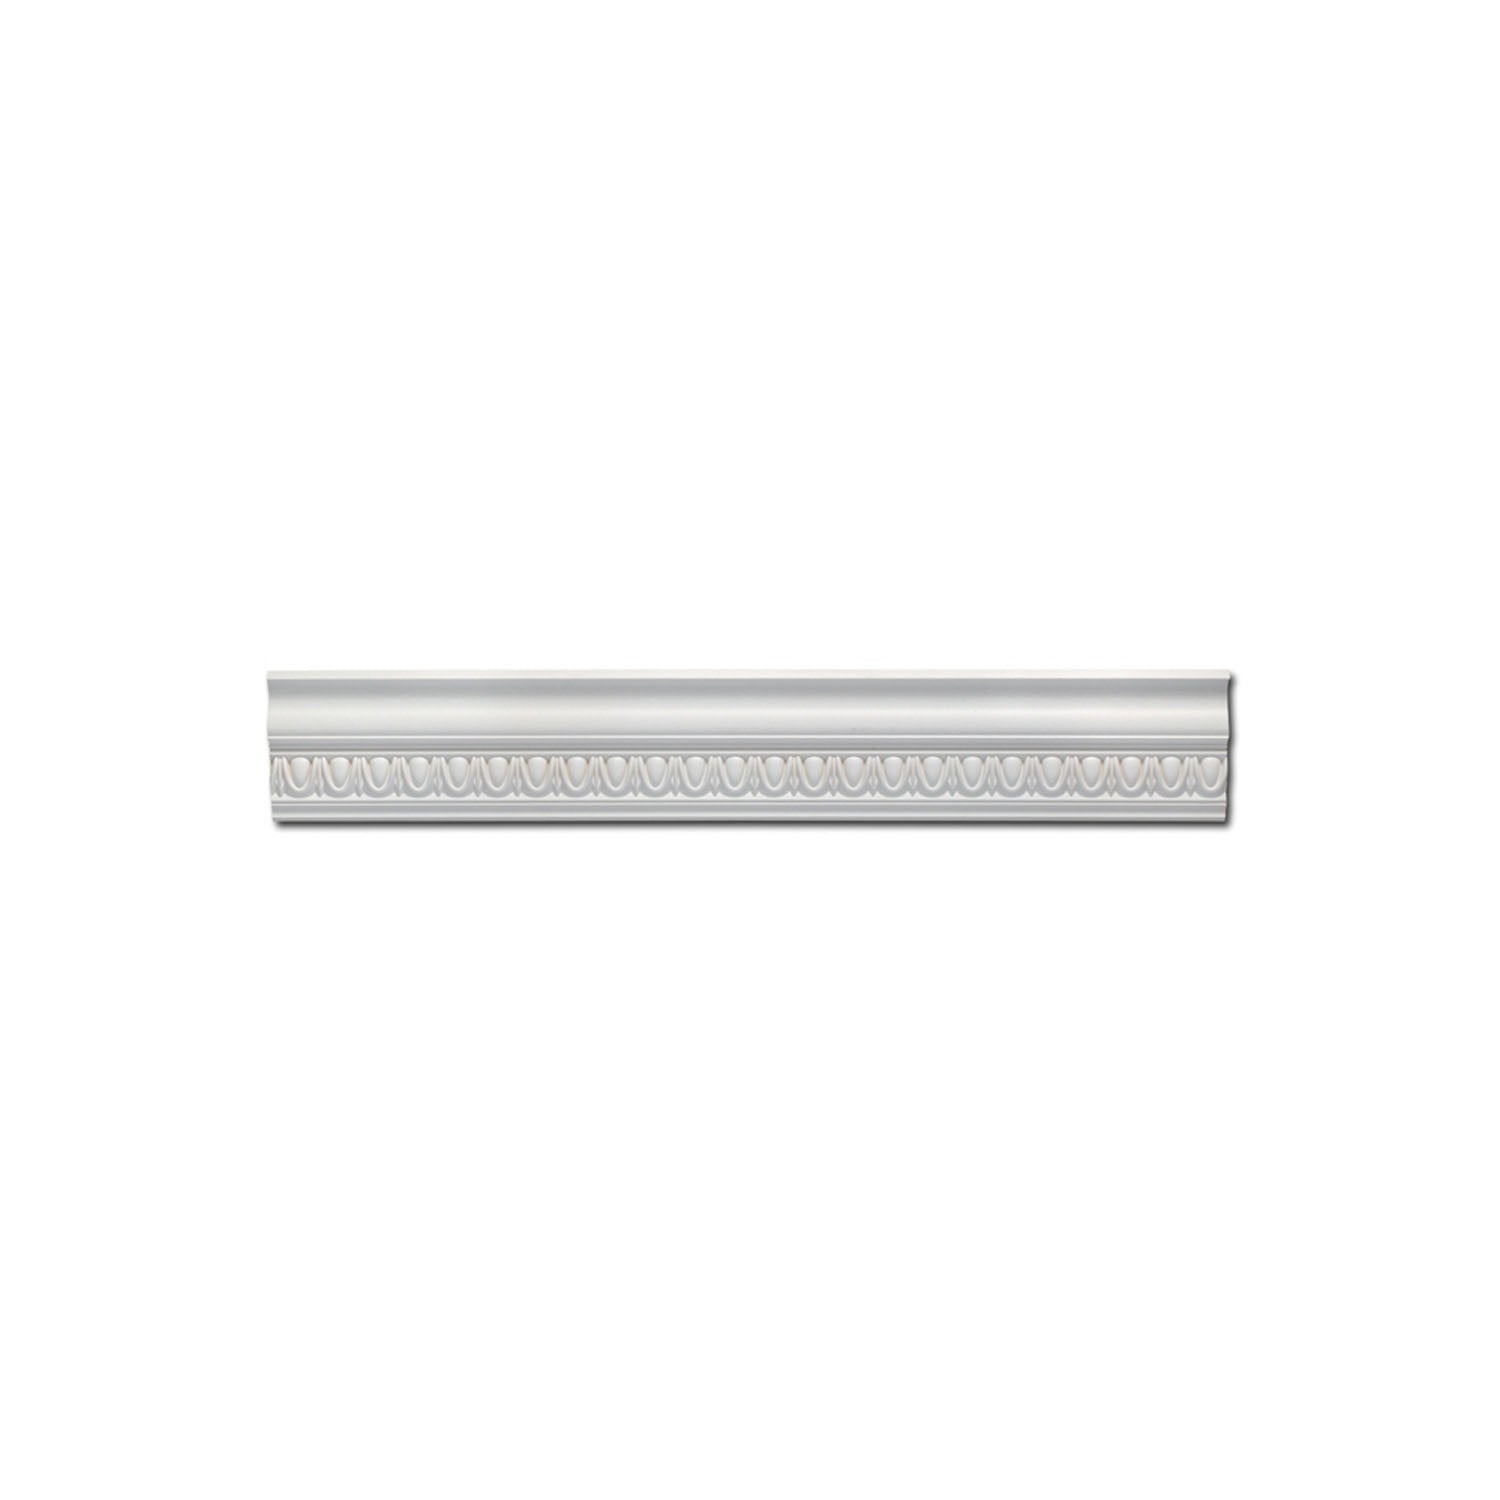 Focal Point Lighting 23610 Crown Crown Decor White